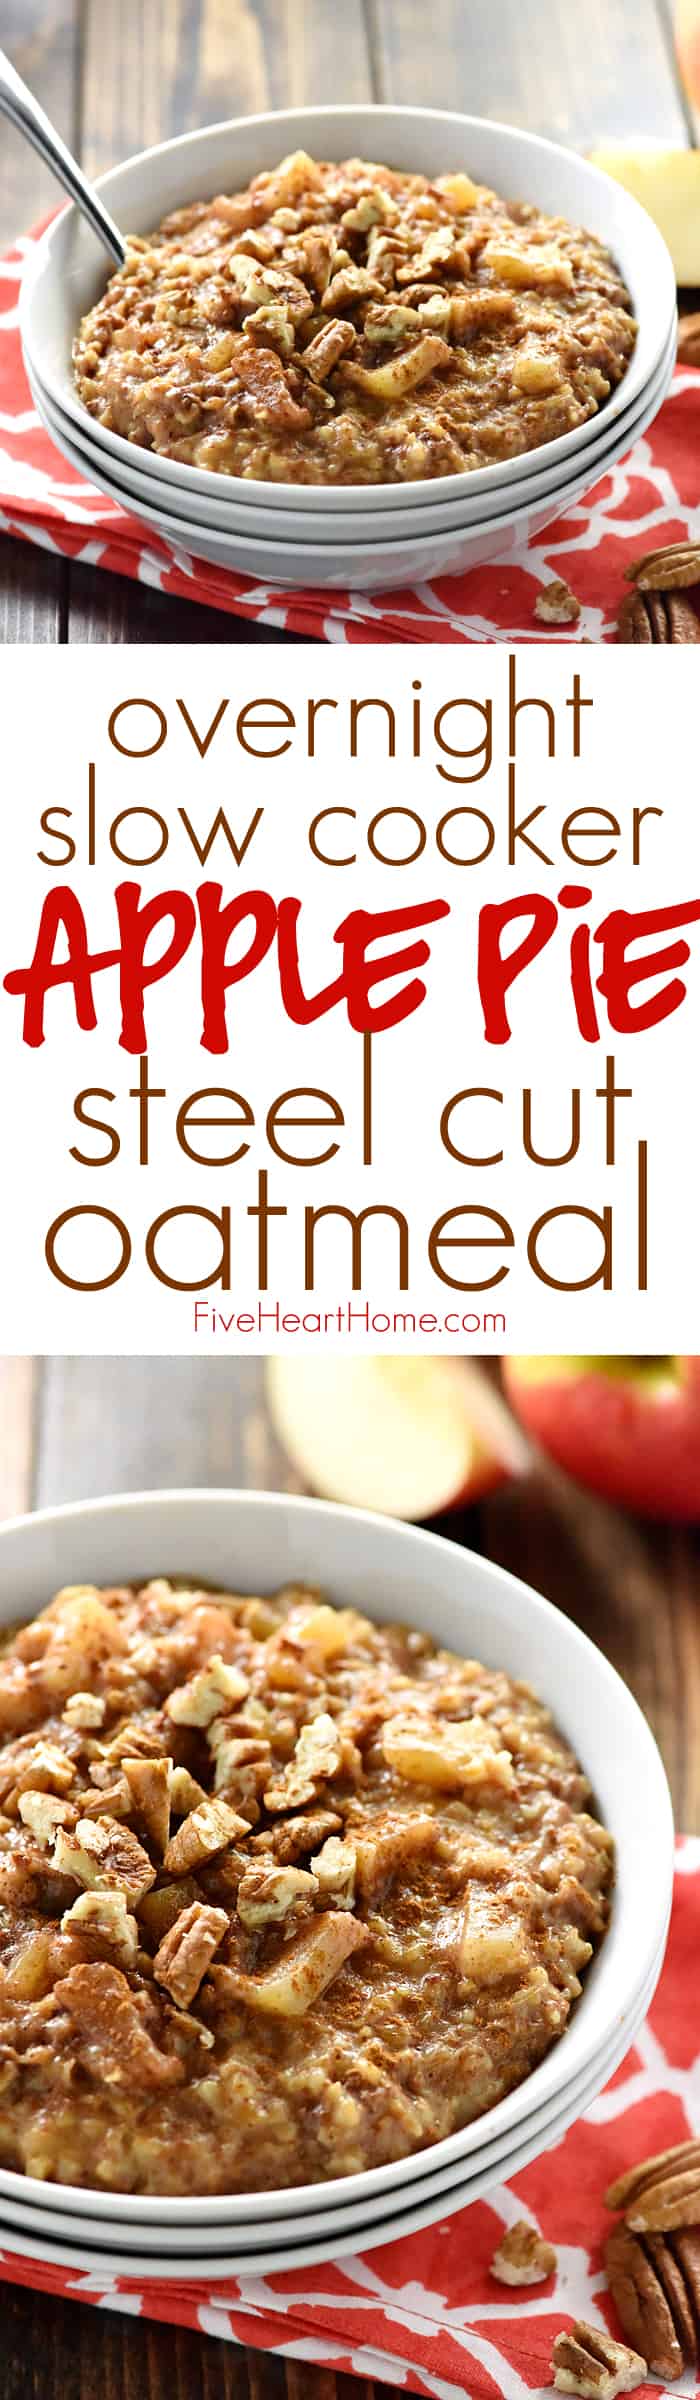 Apple Pie Overnight Steel Cut Oatmeal ~ loaded with steel cut oats and apple cinnamon goodness, this recipe is easy to throw in the slow cooker before bed for an effortless breakfast the next day. And with a special, no-stirring-required trick, you won't have to worry about burnt edges in the morning! | FiveHeartHome.com via @fivehearthome